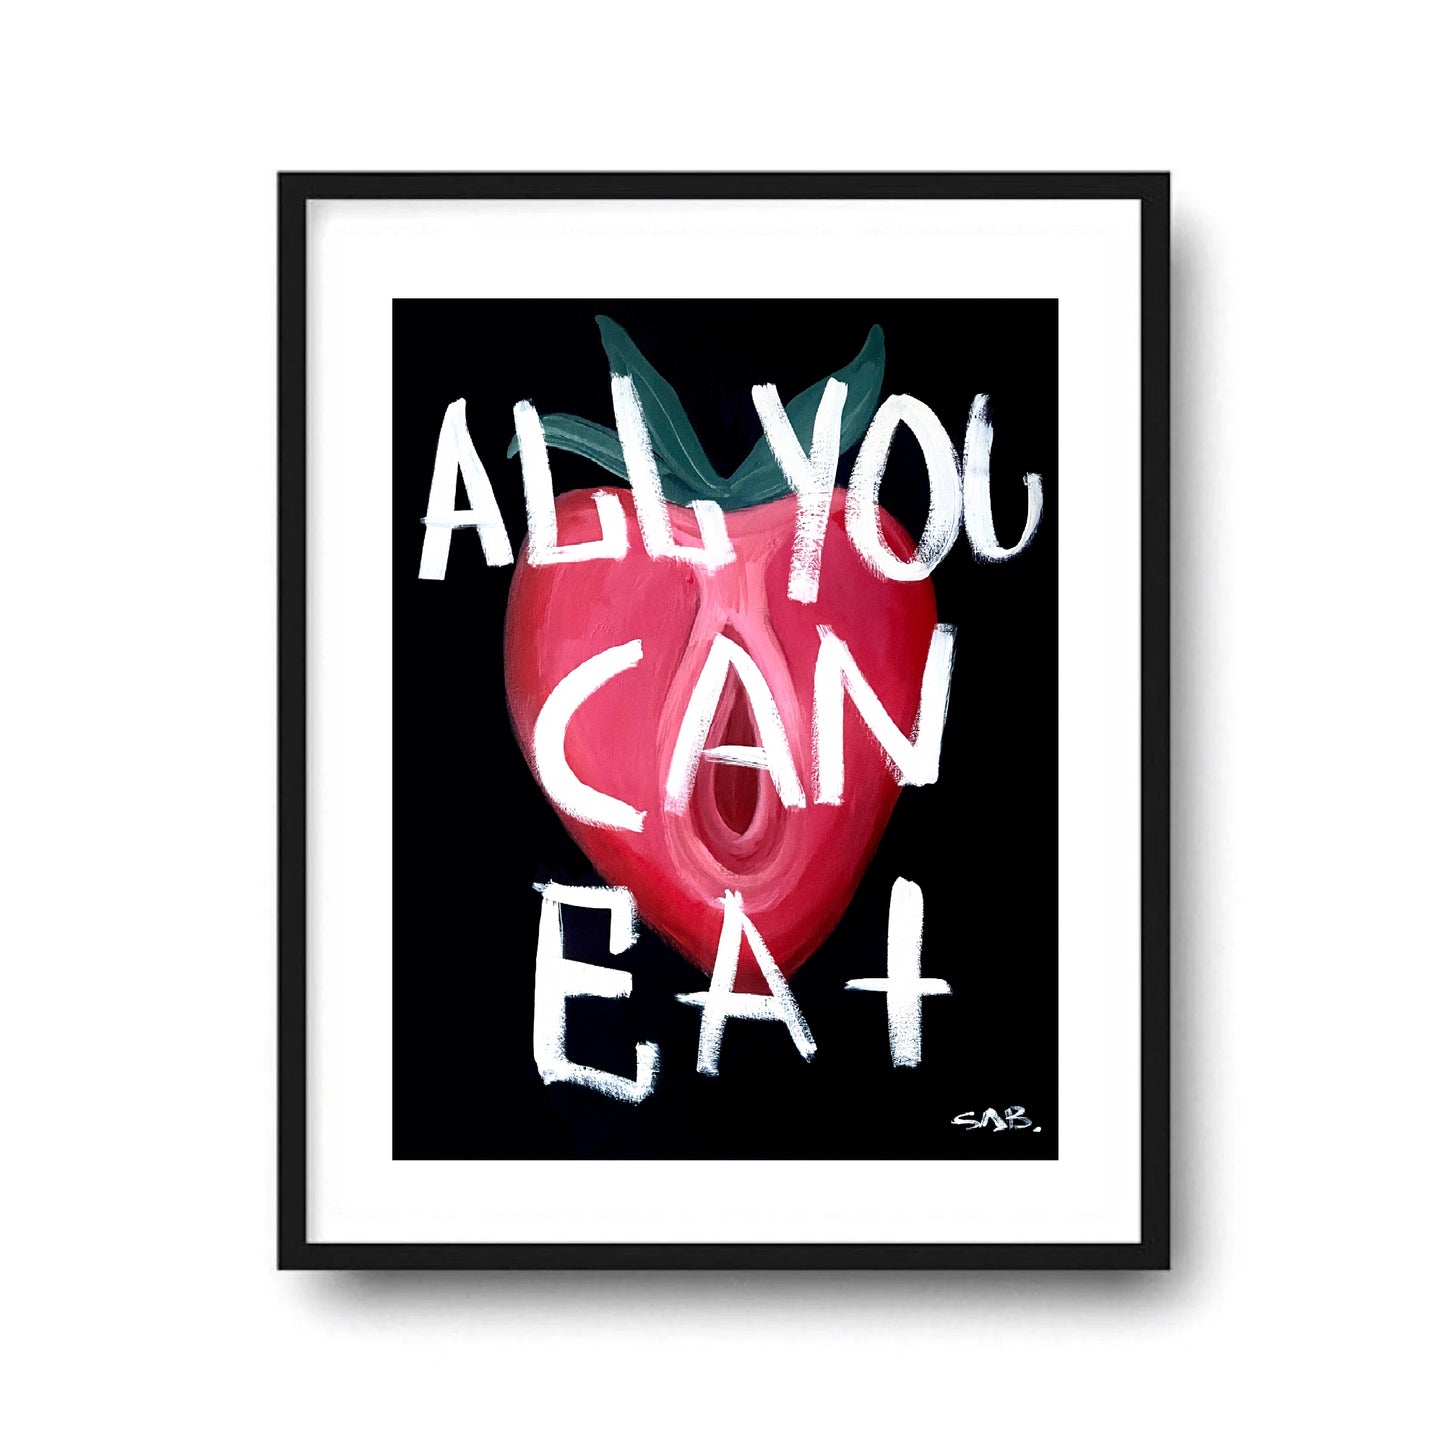 All you can eat fun abstract contemporary art print Lesbian theme